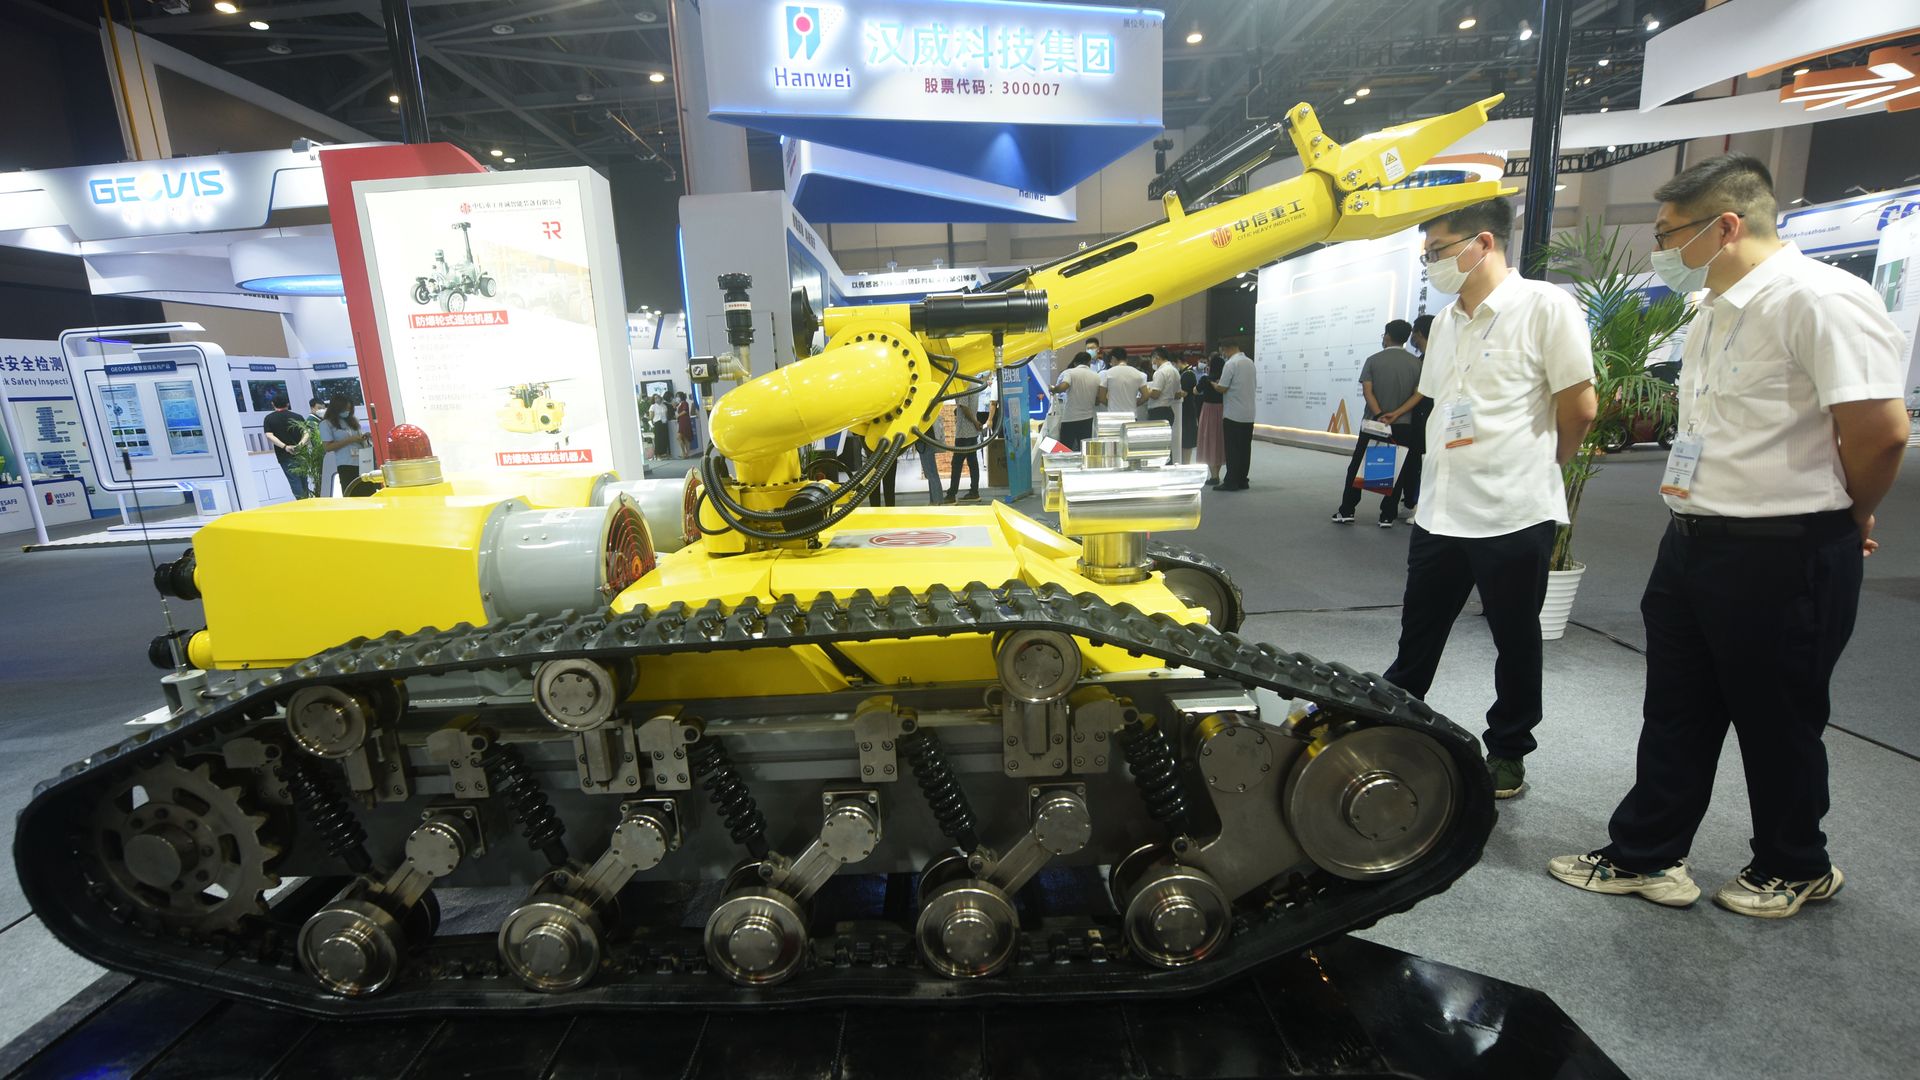 isitors look at a fire extinguishing reconnaissance robot displayed by Citic Heavy Industries at the 2022 International Safety and Emergency Response Expo in Hangzhou, Zhejiang province, China.